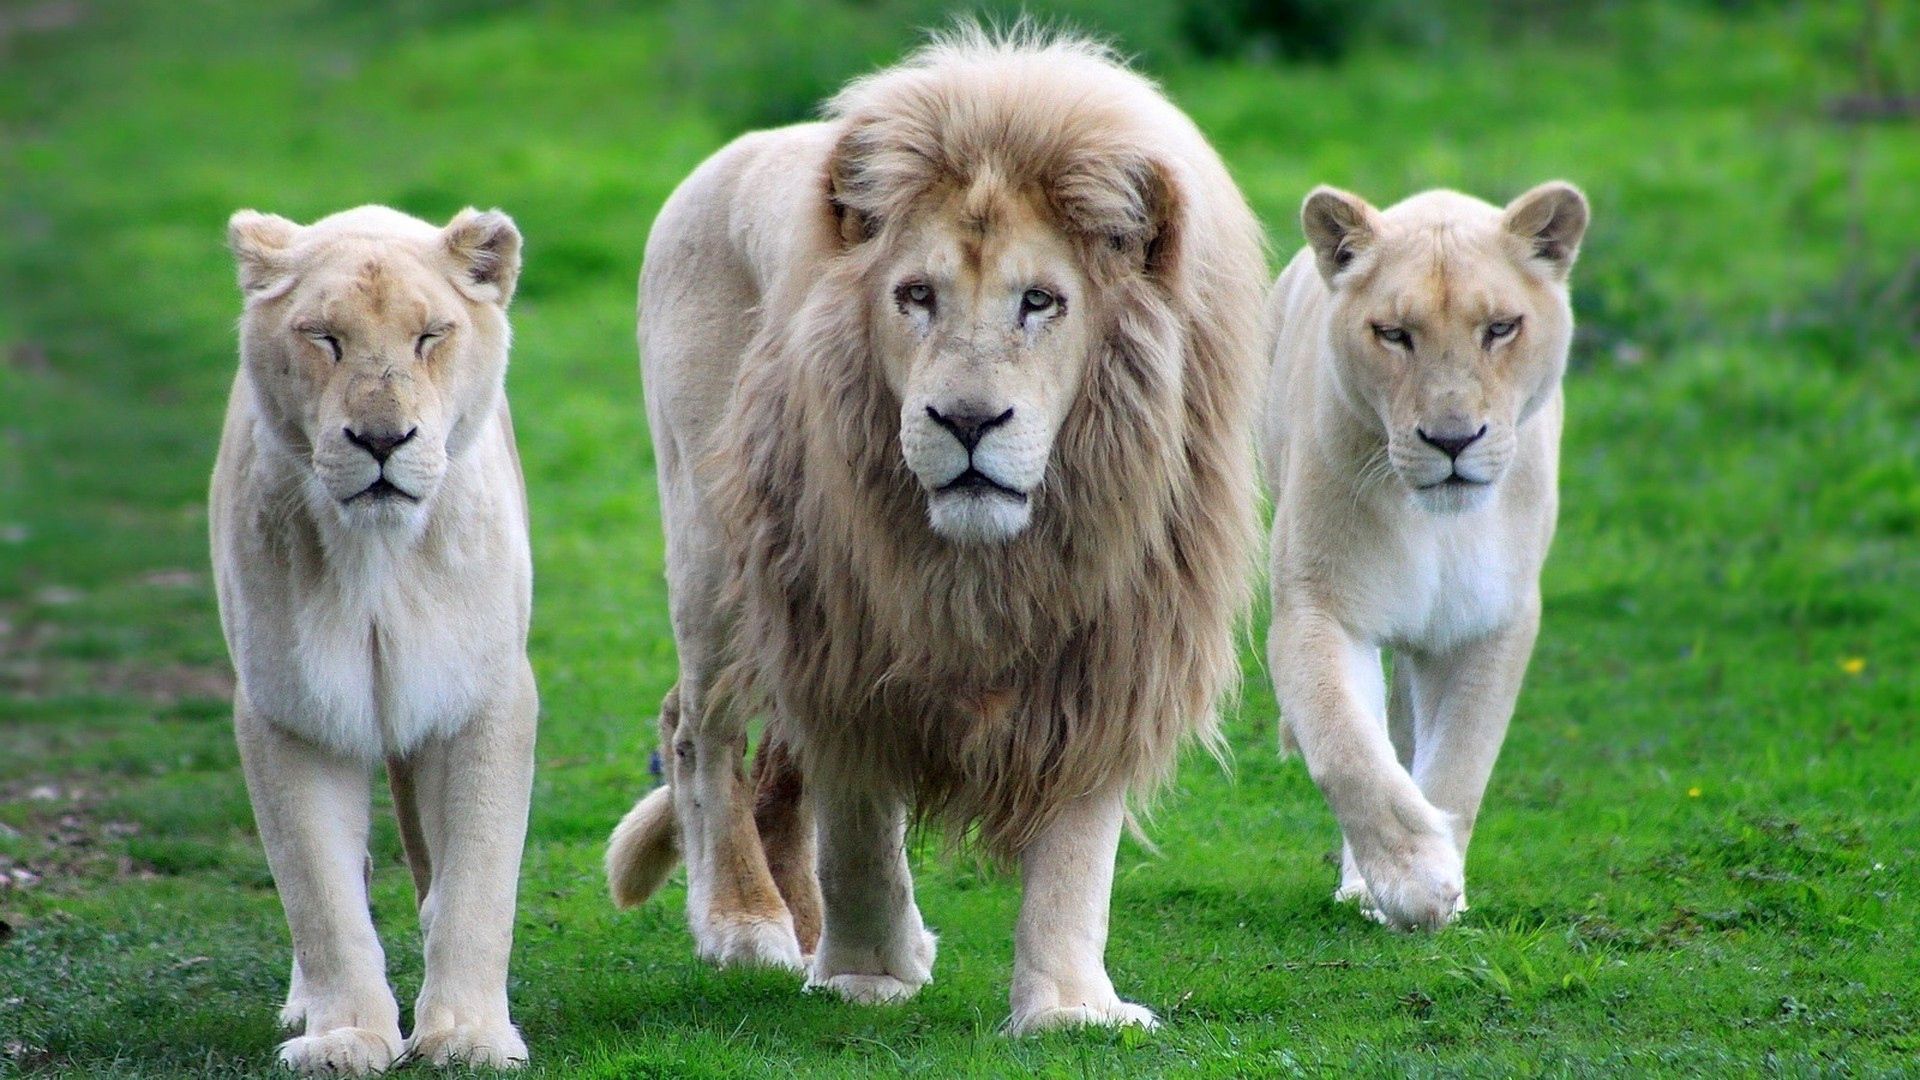 lion, animals, grass, stroll, family images